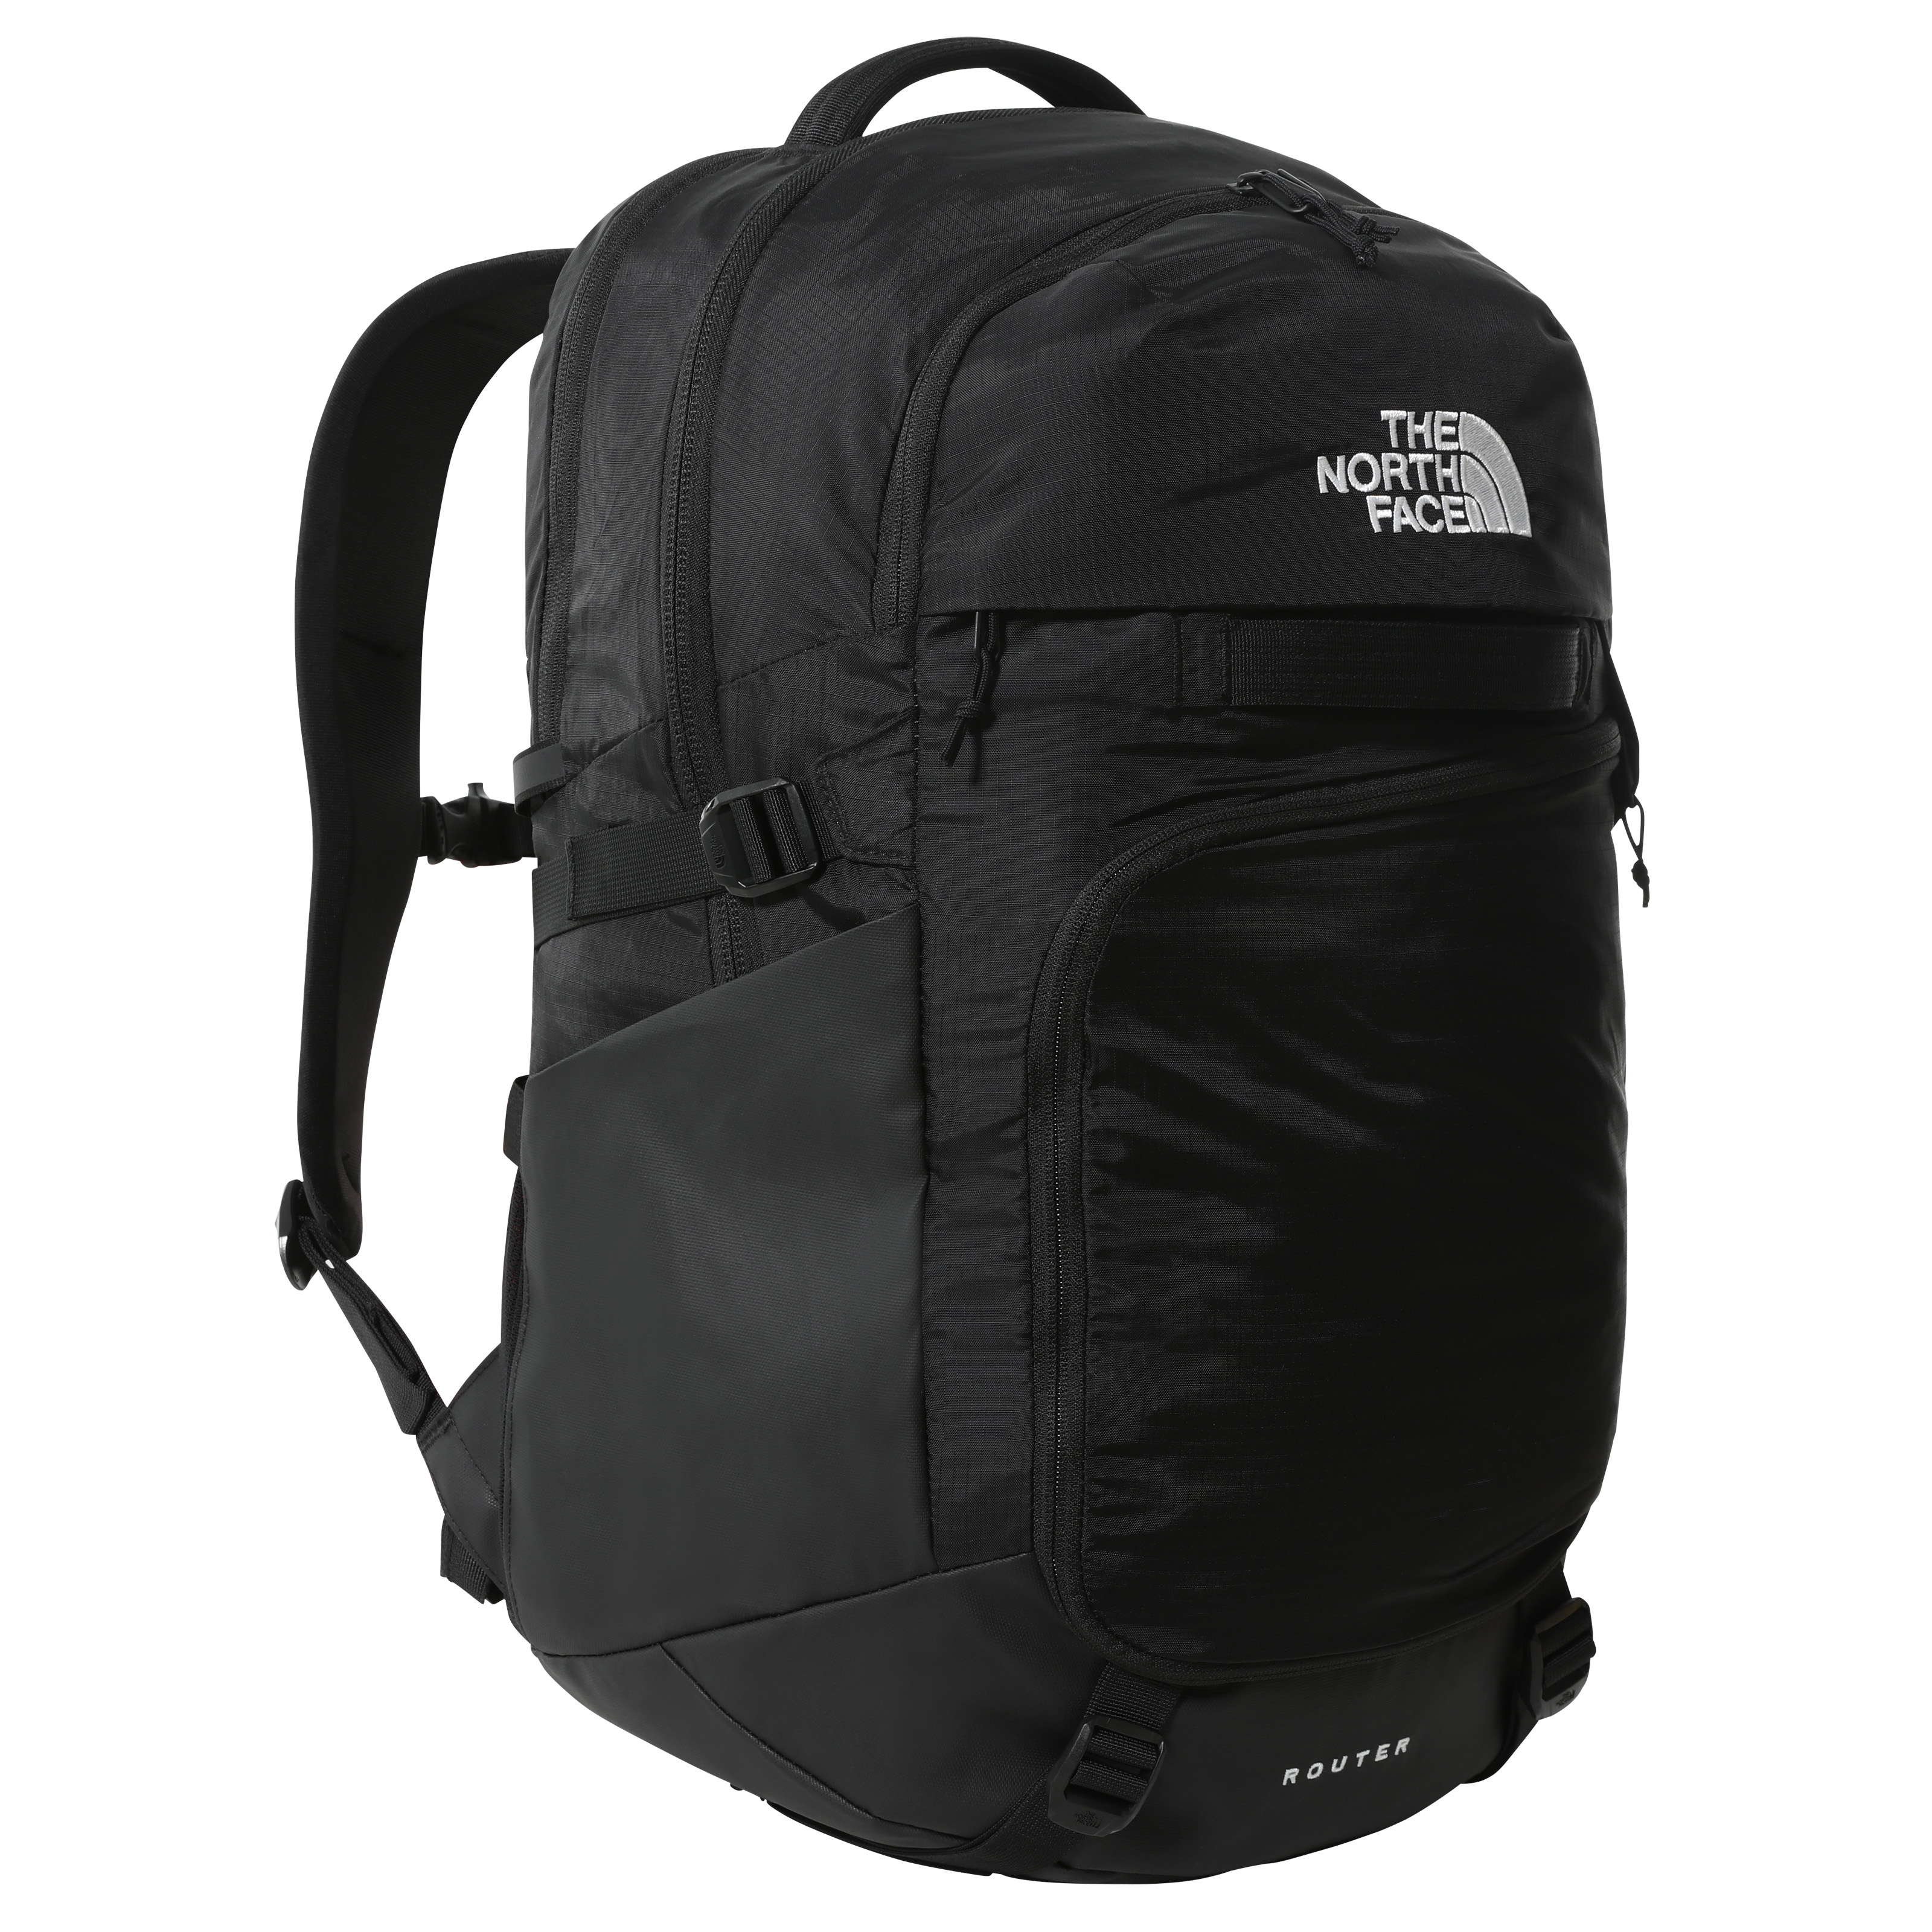 The North Face BATOH ROUTER KX7